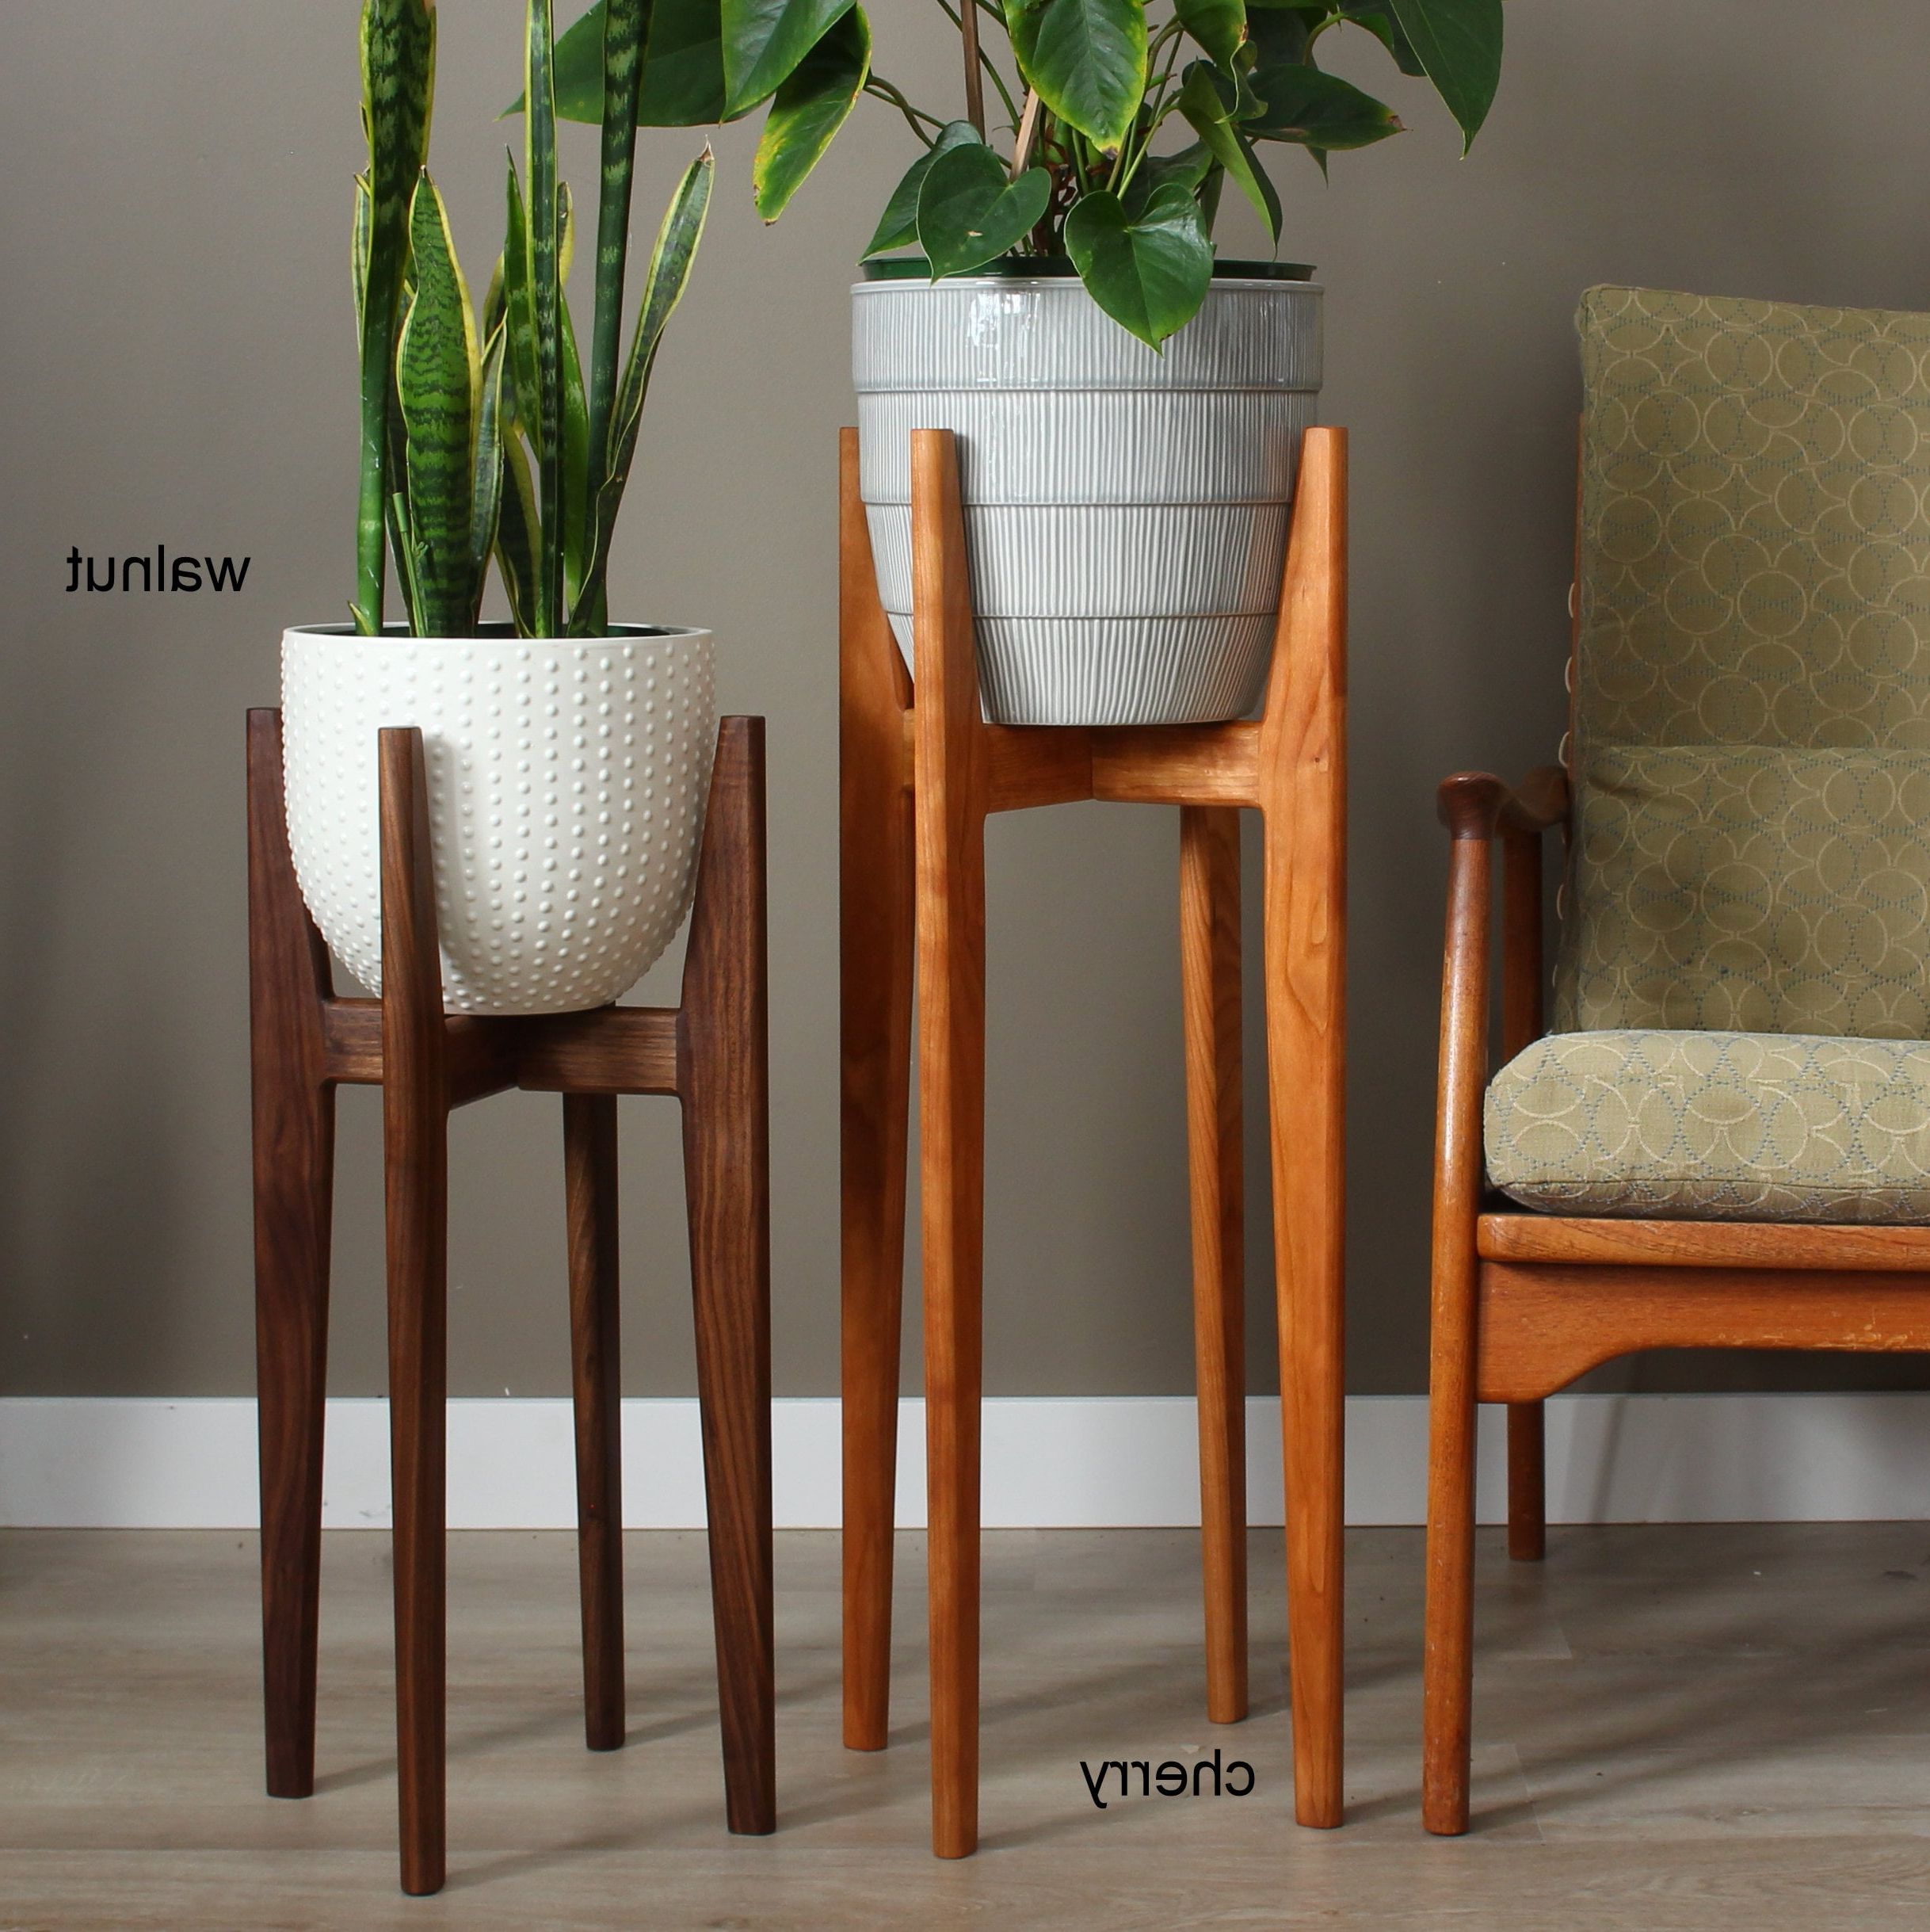 Mid Century Modern Plant Stand Our Original Design Indoor – Etsy Italia Intended For Fashionable Wood Plant Stands (View 1 of 10)